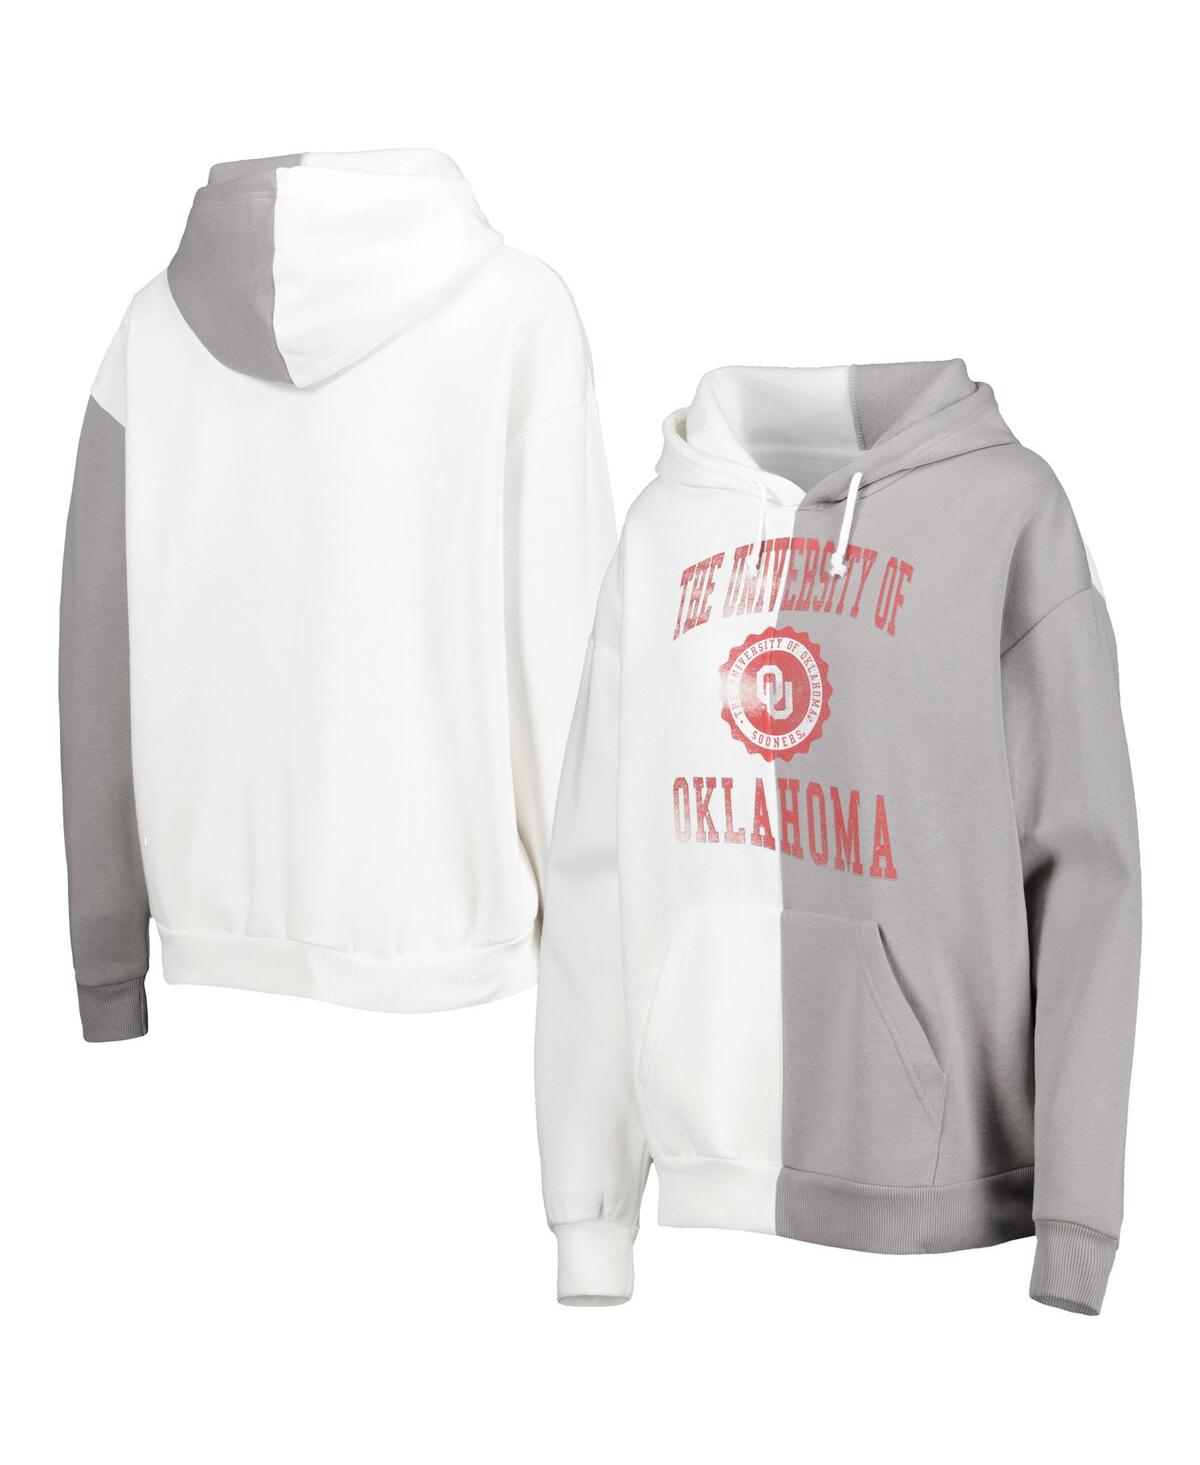 Women's Gameday Couture Gray and White Oklahoma Sooners Split Pullover Hoodie - Gray, White